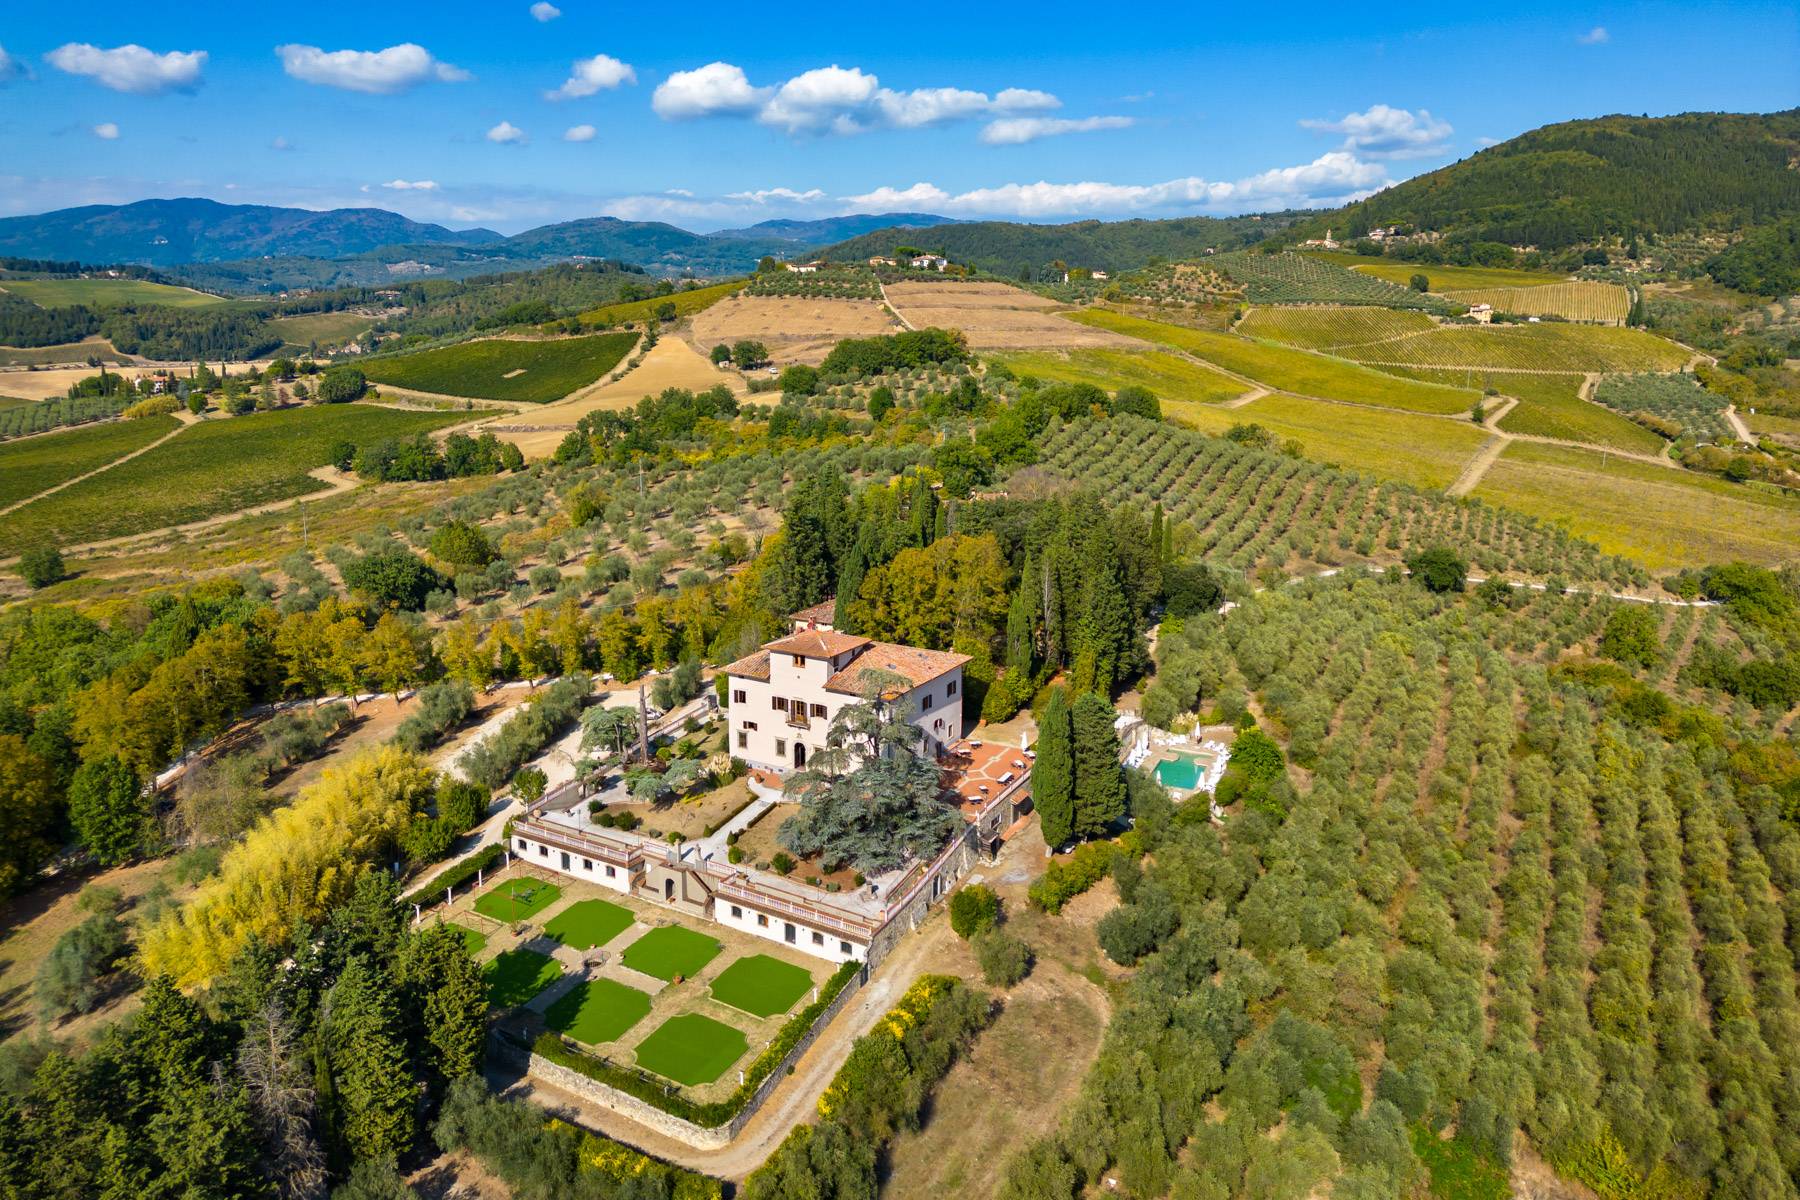 Exclusive resort recently renovated in Tuscany